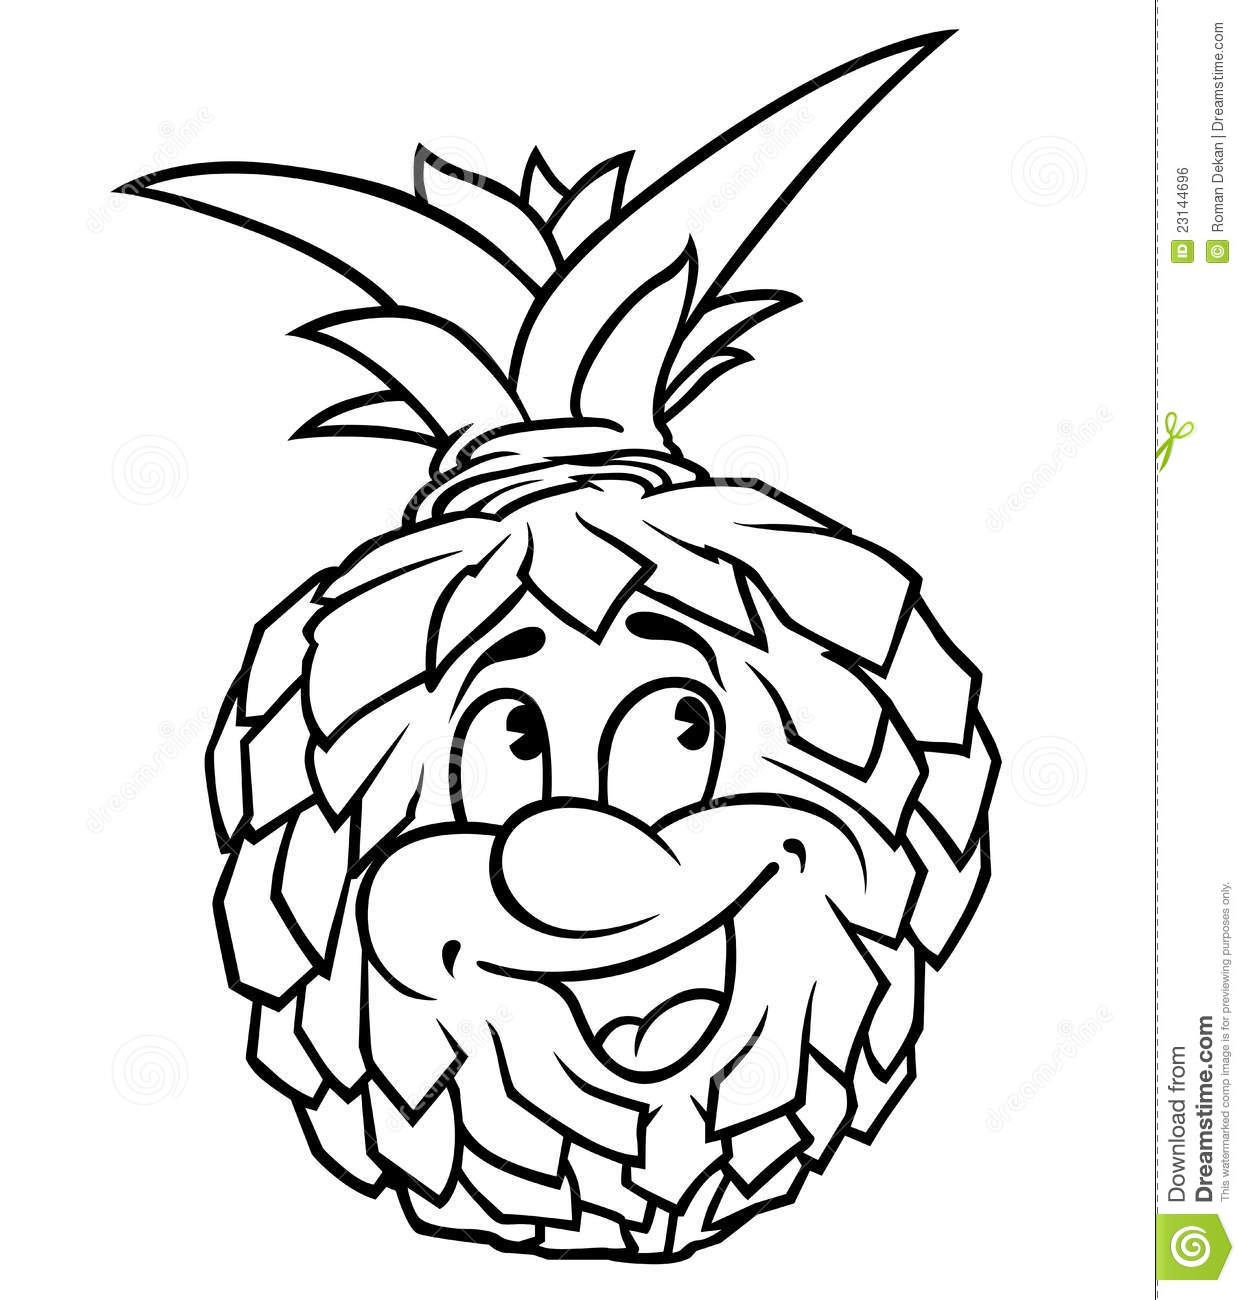 Pineapple Clipart Black And White   Clipart Panda   Free Clipart